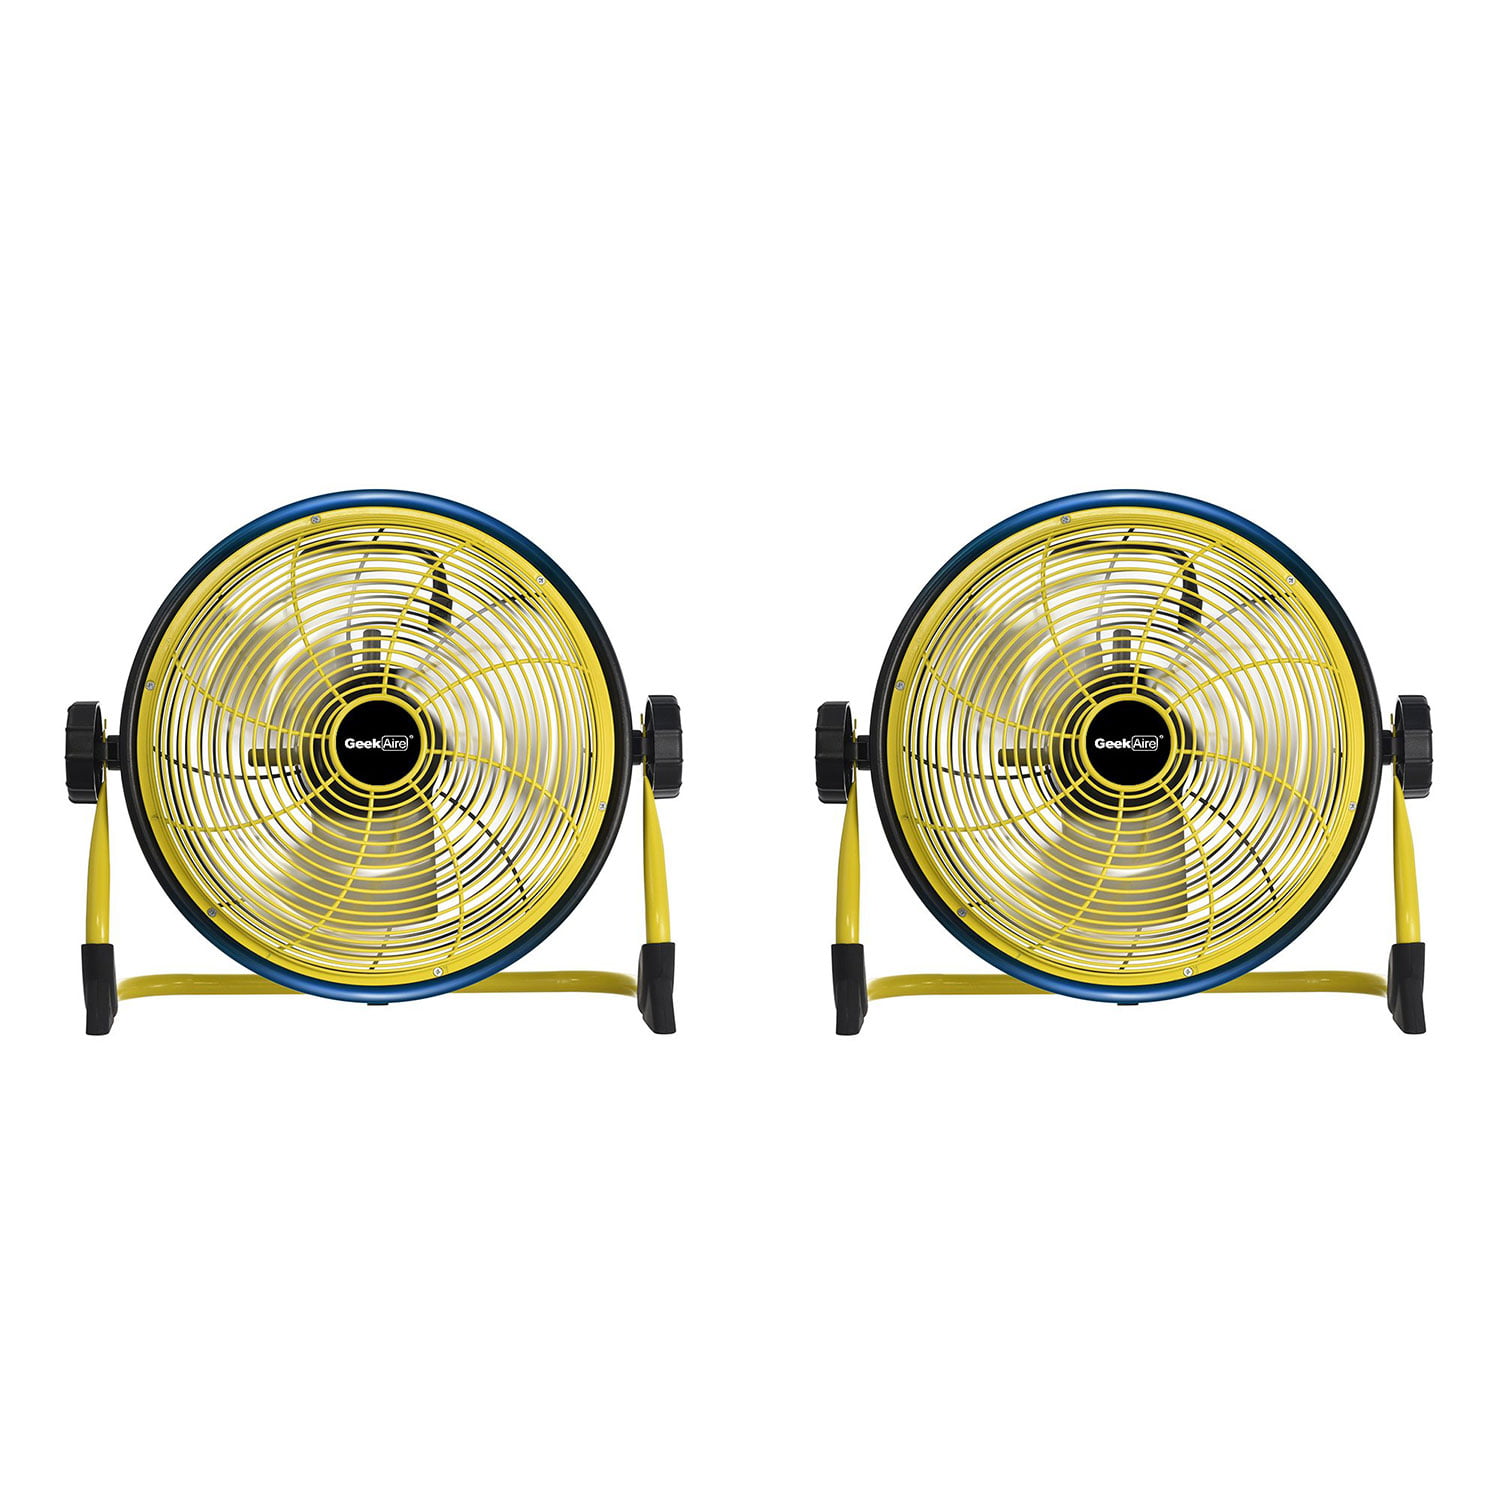 Geek Aire CF1 Outdoor Fan 12 Inch Cordless Variable Speed Rechargeable 2 Pack 